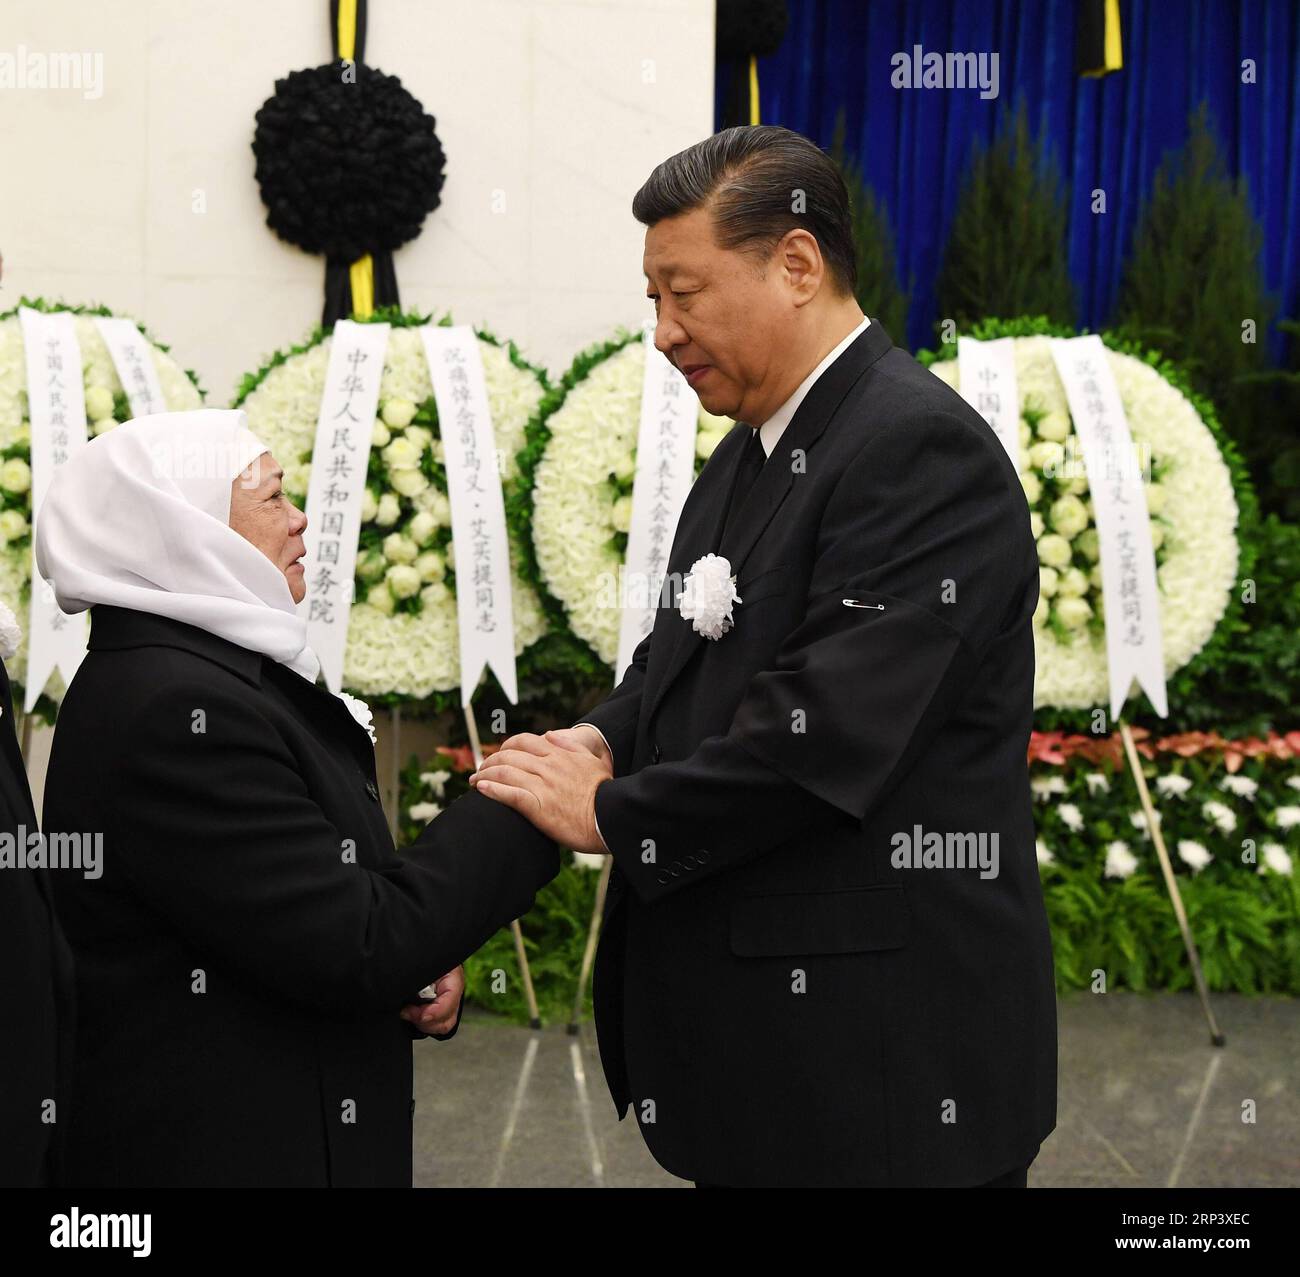 (181018) -- BEIJING, Oct. 18, 2018 -- Chinese President Xi Jinping (R) extends condolence to the family of the late Ismail Amat, vice chairperson of the Standing Committee of the 10th National People s Congress, at the Babaoshan Revolutionary Cemetery in Beijing, capital of China, Oct. 18, 2018. The funeral of Ismail Amat was held Thursday in Beijing. Ismail Amat, also vice chairperson of the 7th National Committee of the Chinese People s Political Consultative Conference and former state councilor, passed away due to illness at the age of 84 in Beijing on Oct. 16. Xi Jinping, Li Zhanshu, Wang Stock Photo